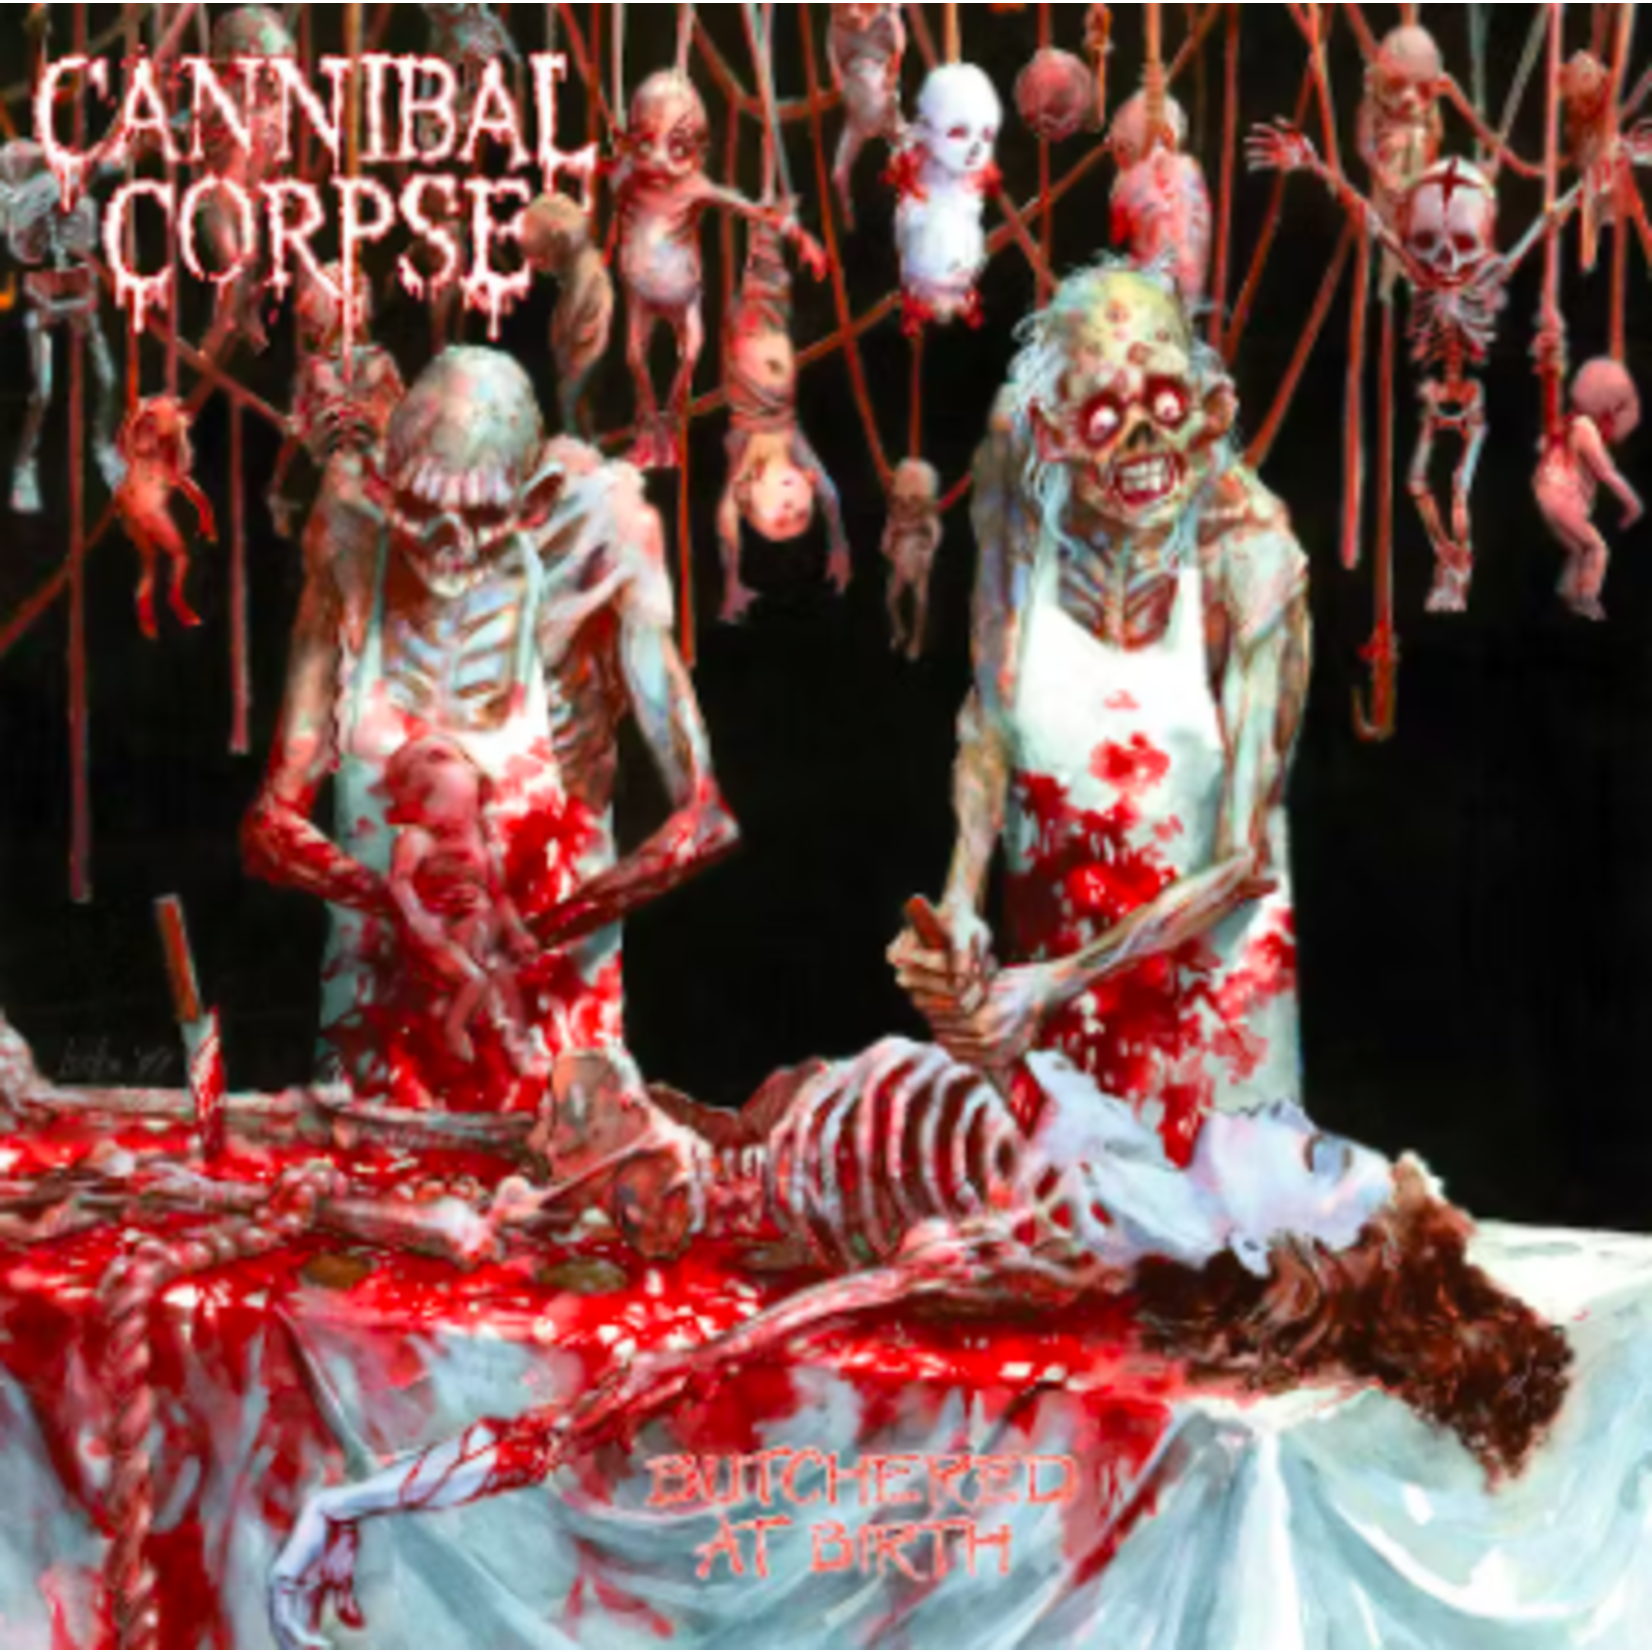 [New] Cannibal Corpse: Butchered At Birth (sangria vinyl) [Metal Blade Records]